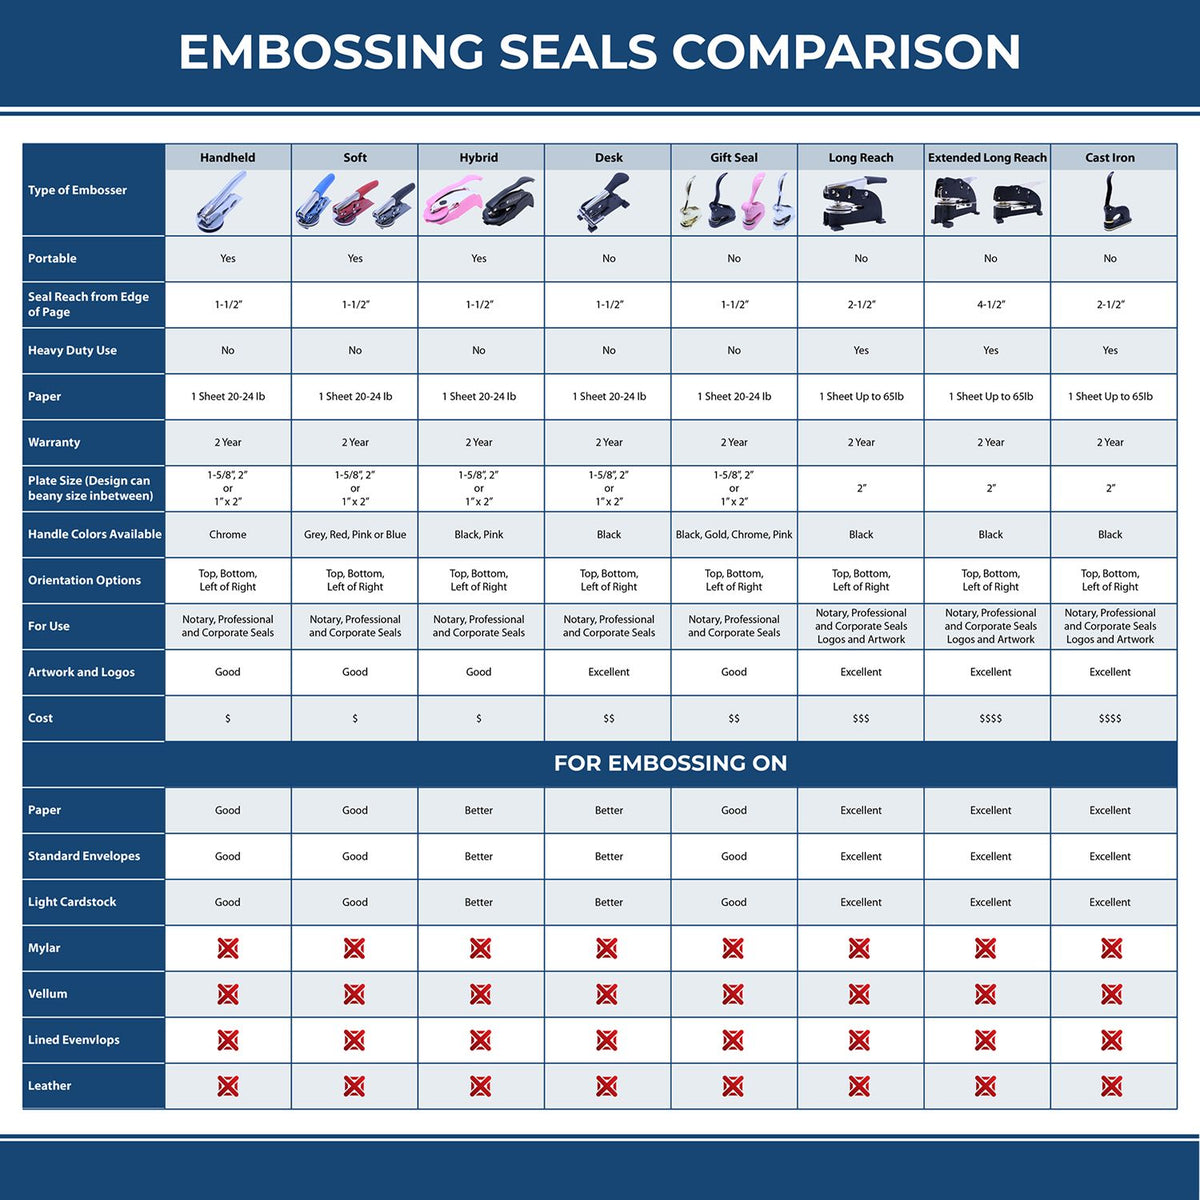 A comparison chart for the different types of mount models available for the Soft Georgia Professional Geologist Seal